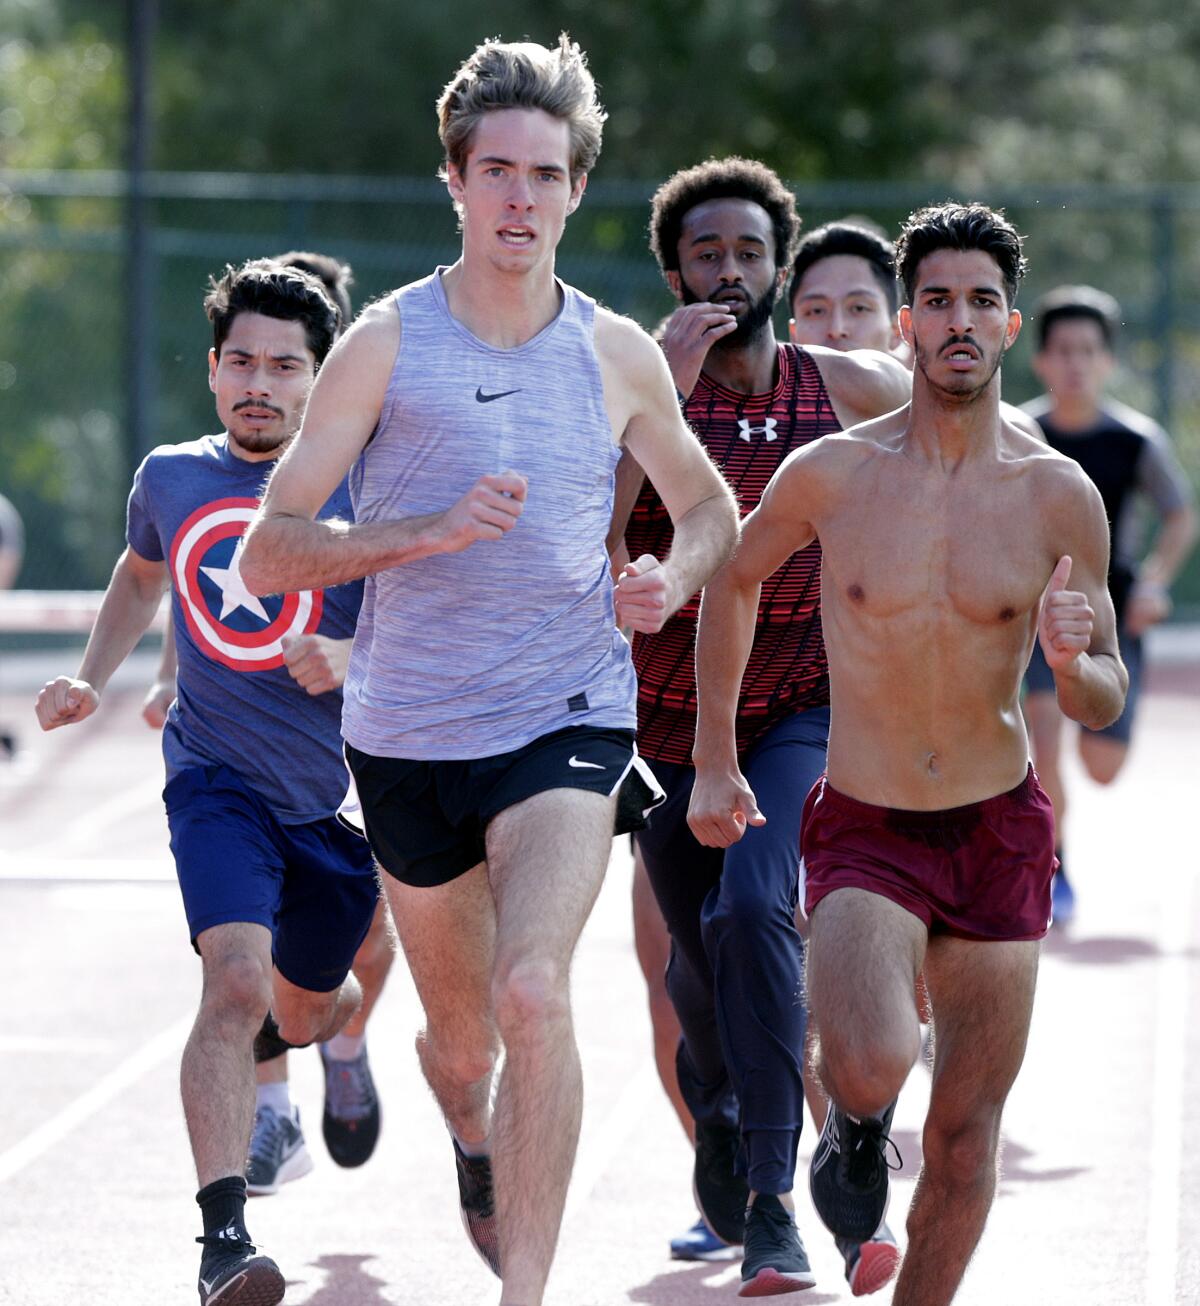 GCC's Spencer Geck, a Crescenta Valley High School graduate, runs laps with teammates at track practice at Glendale Community College on Tuesday, January 29, 2020.